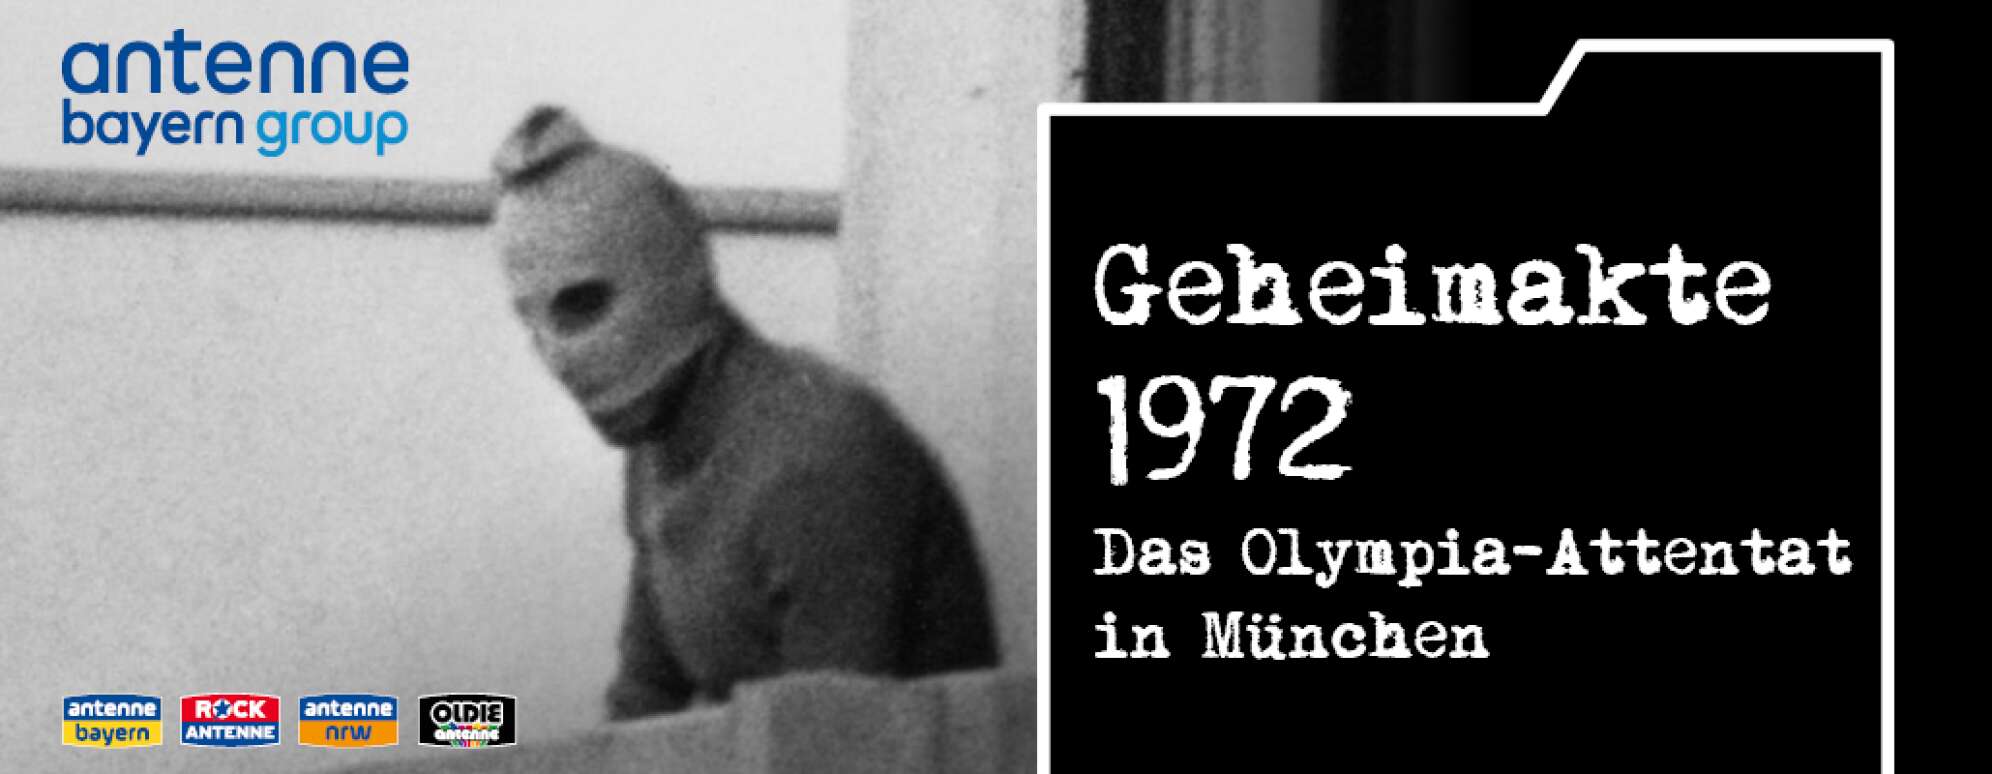 Geheimakte-Olympia-Podcast-Cove